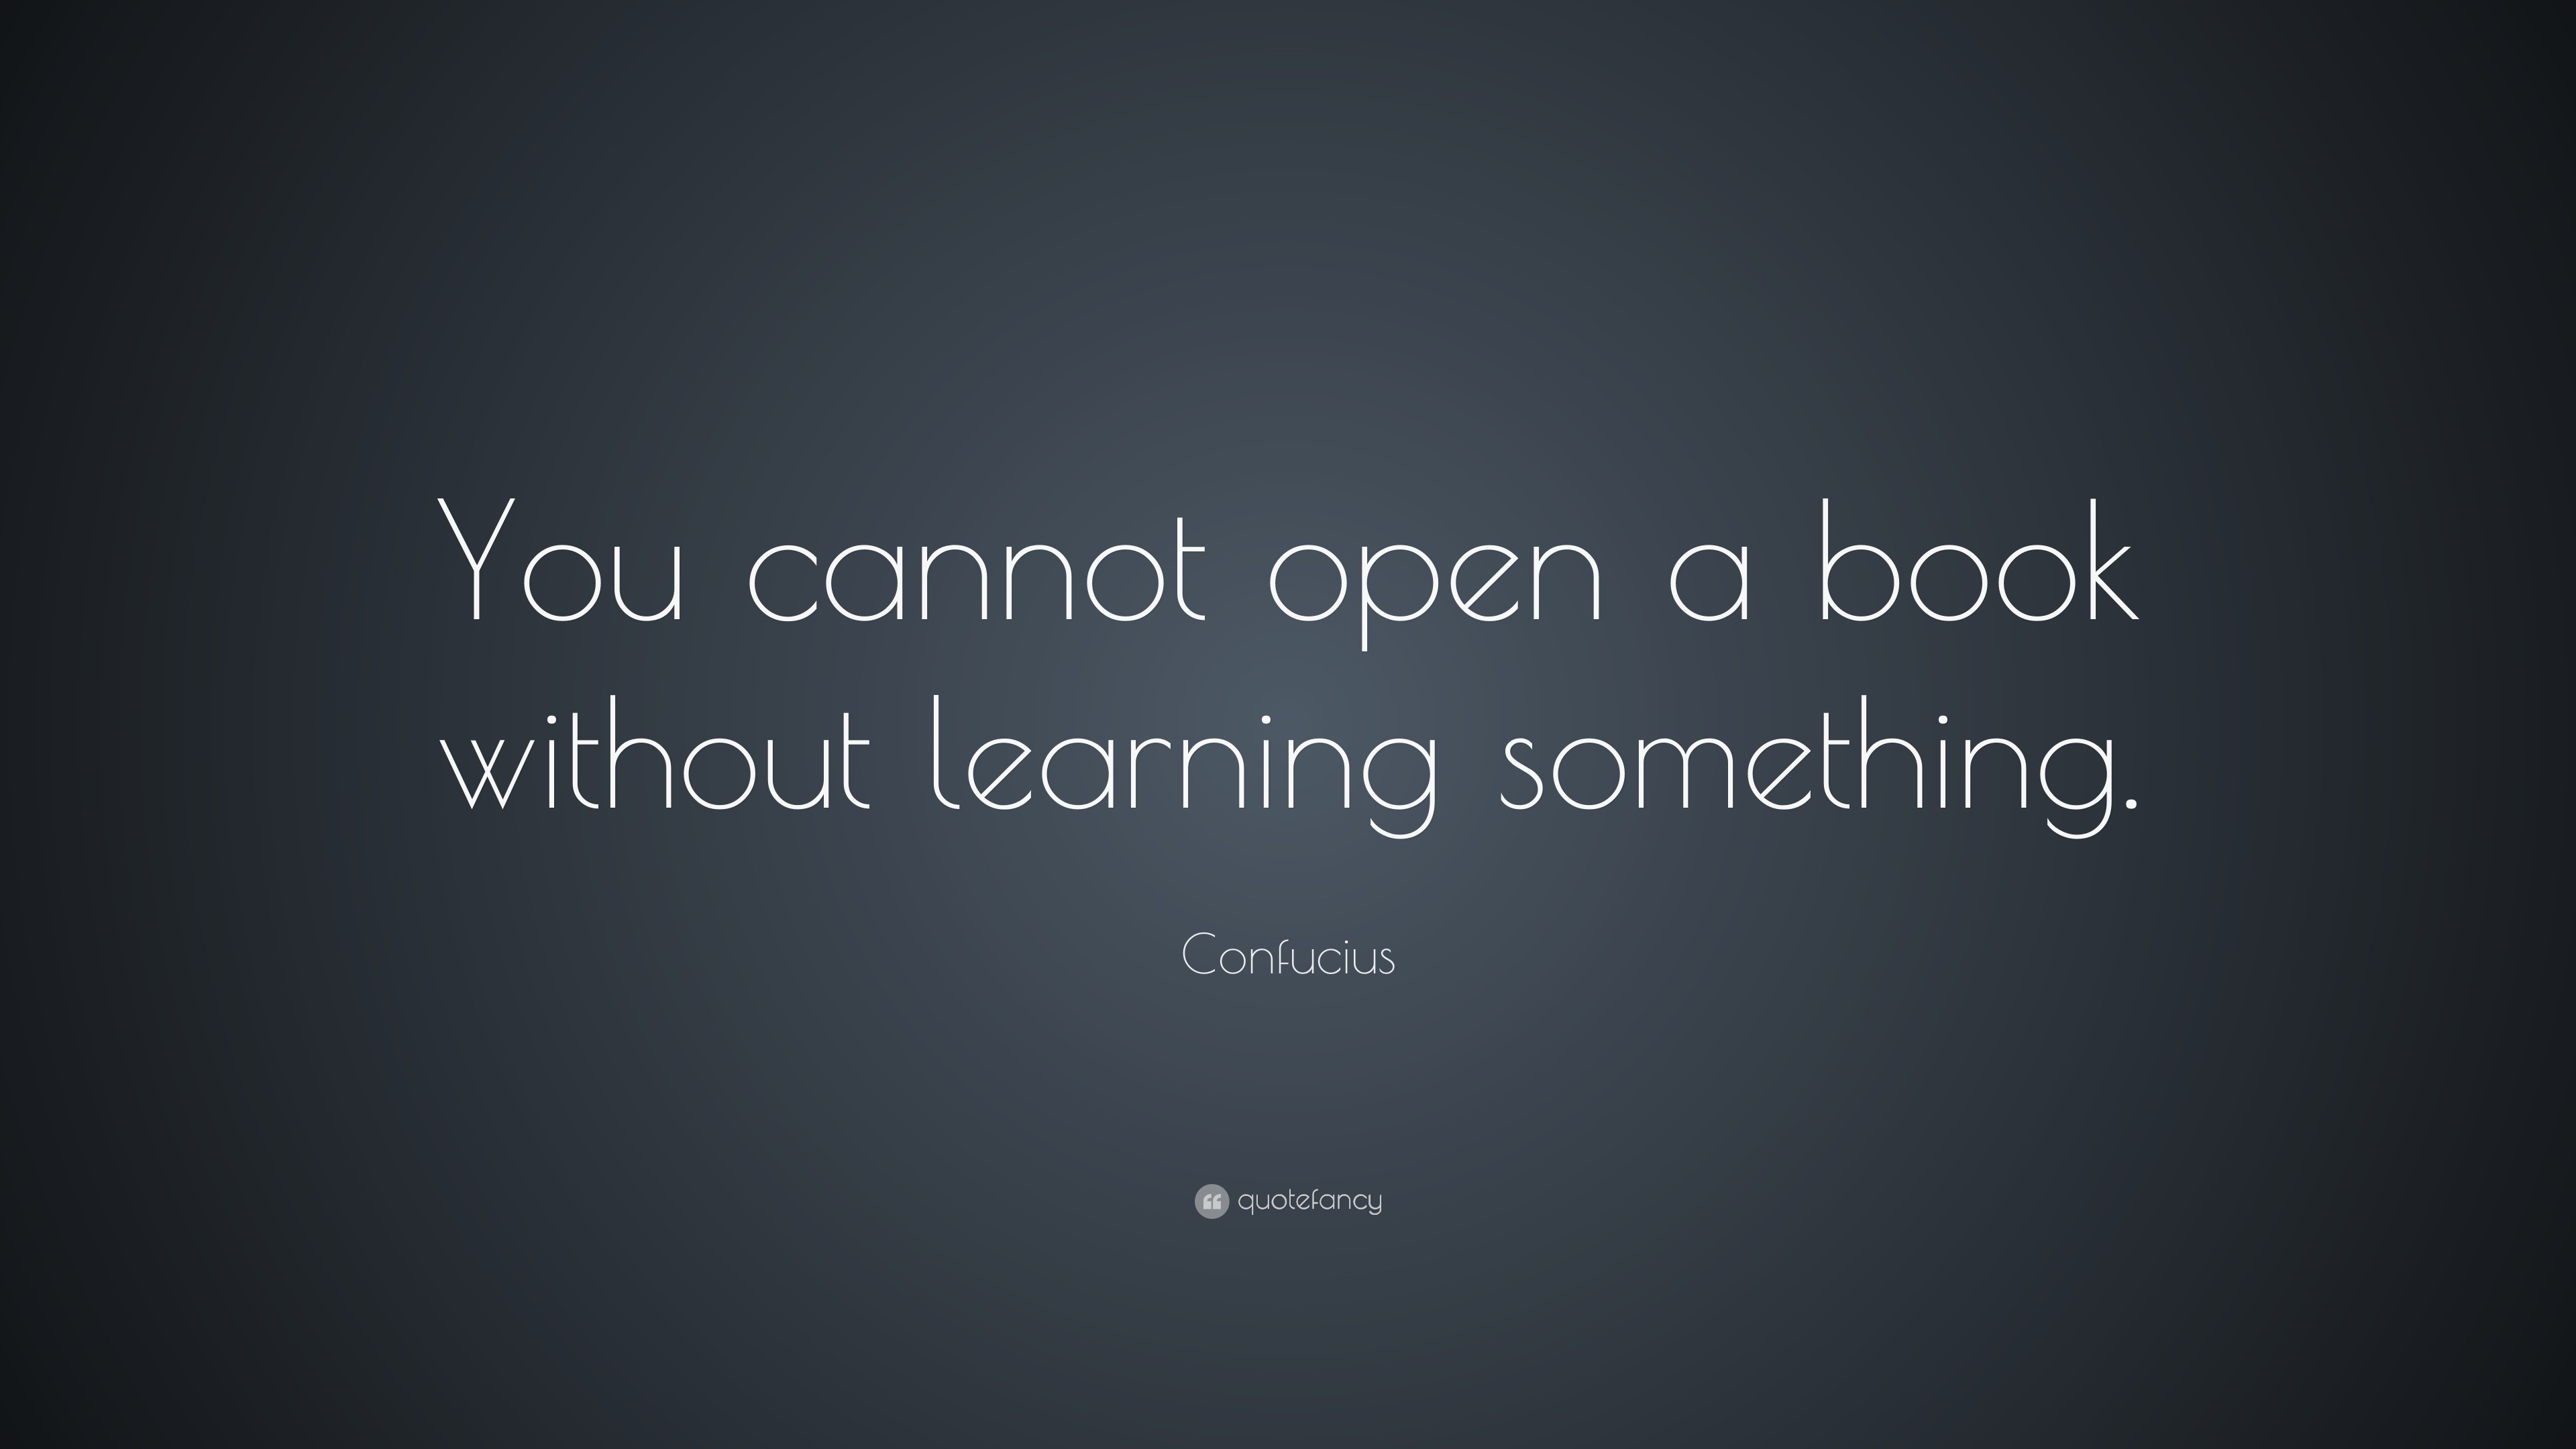 3840x2160 Confucius Quote: “You cannot open a book without learning something.”